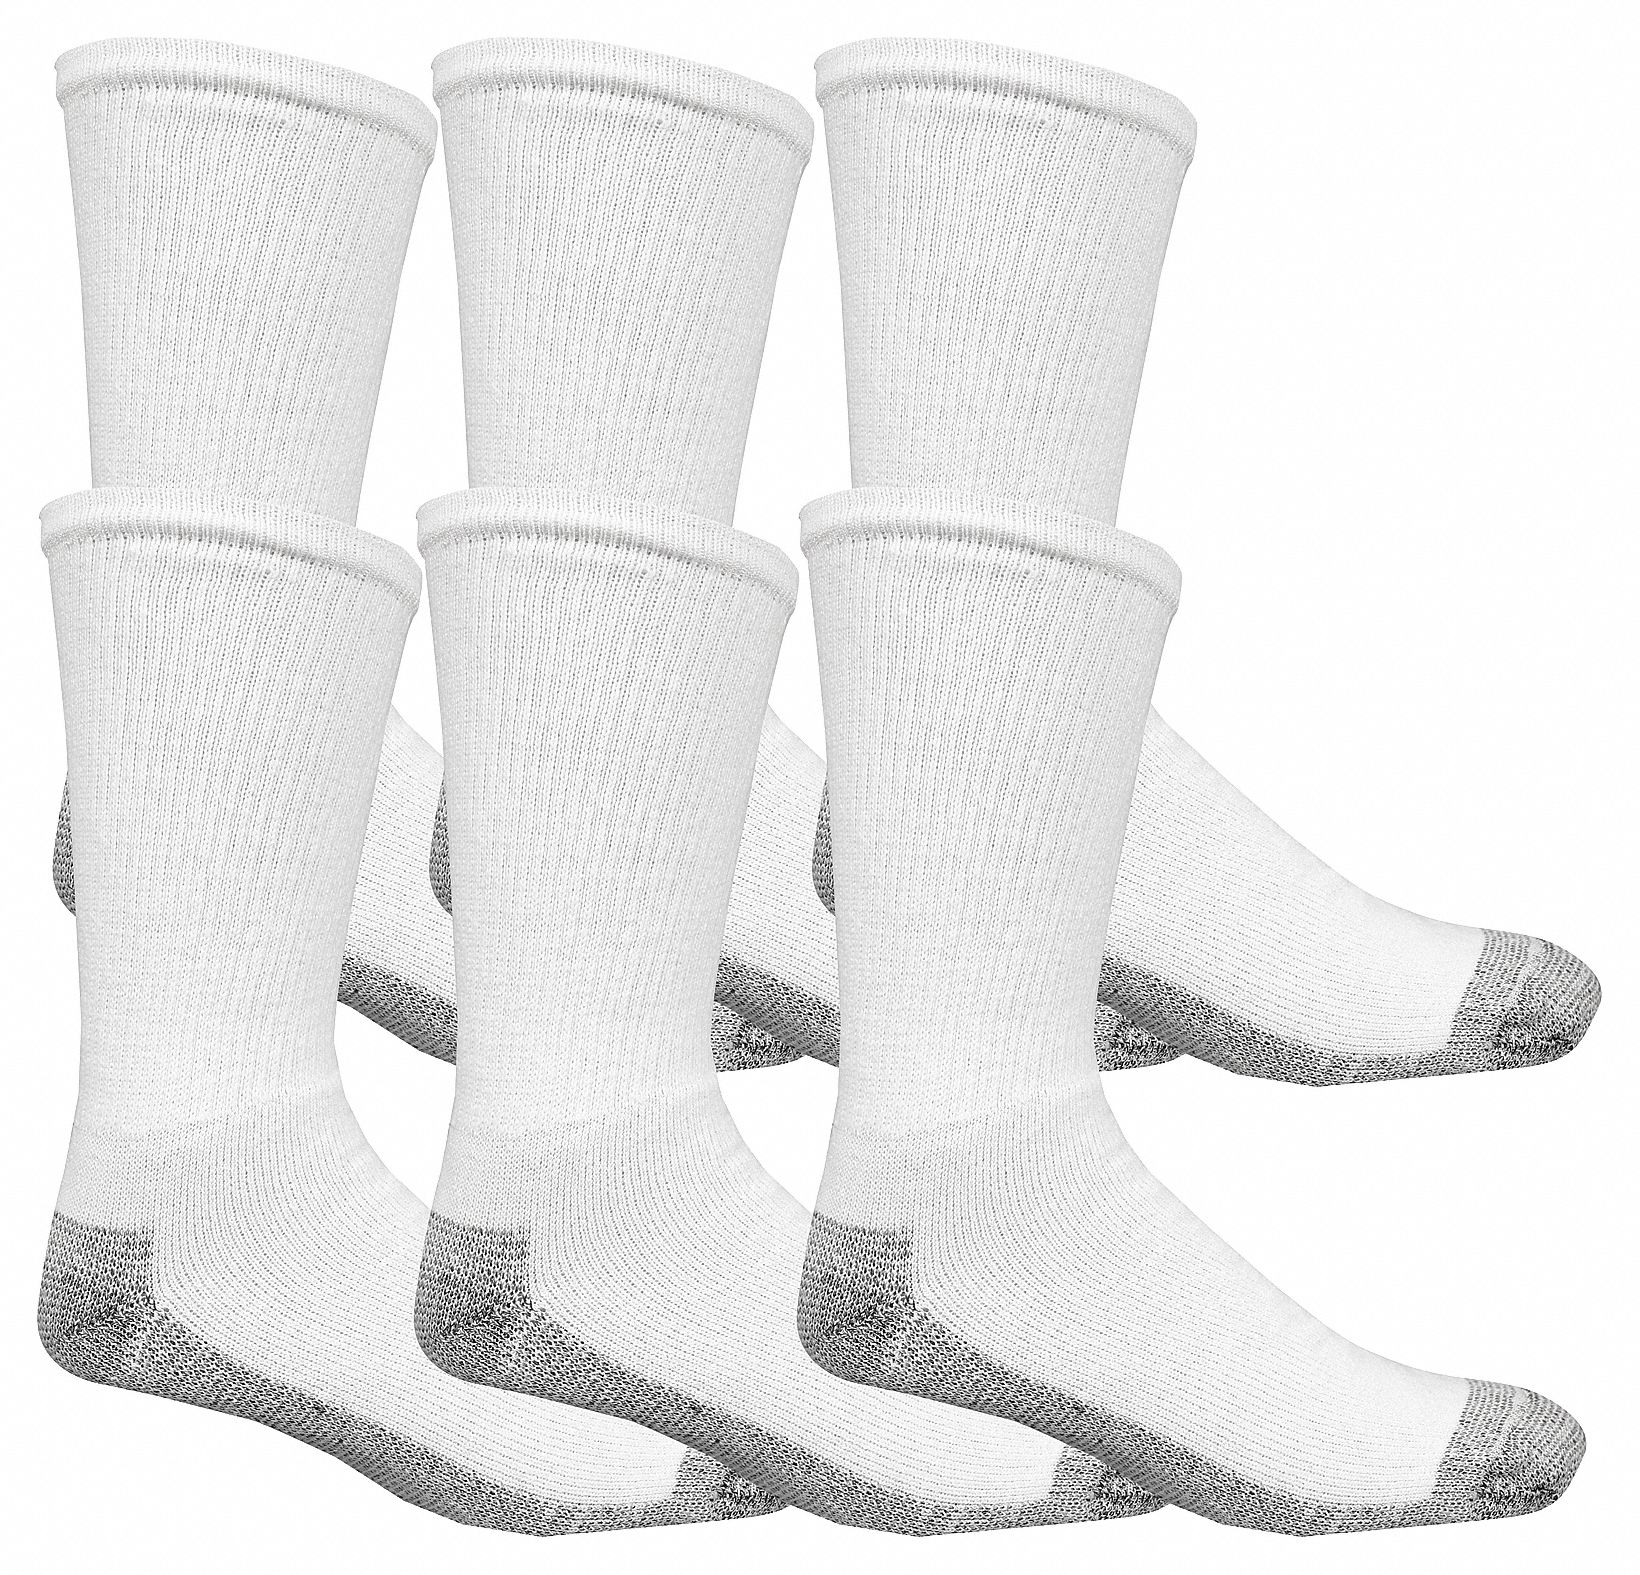 Socks: Over-the-Calf, Men's, 13 to 15 Fits Shoe Size, White, Cotton, FRUIT OF THE LOOM, 6 PK